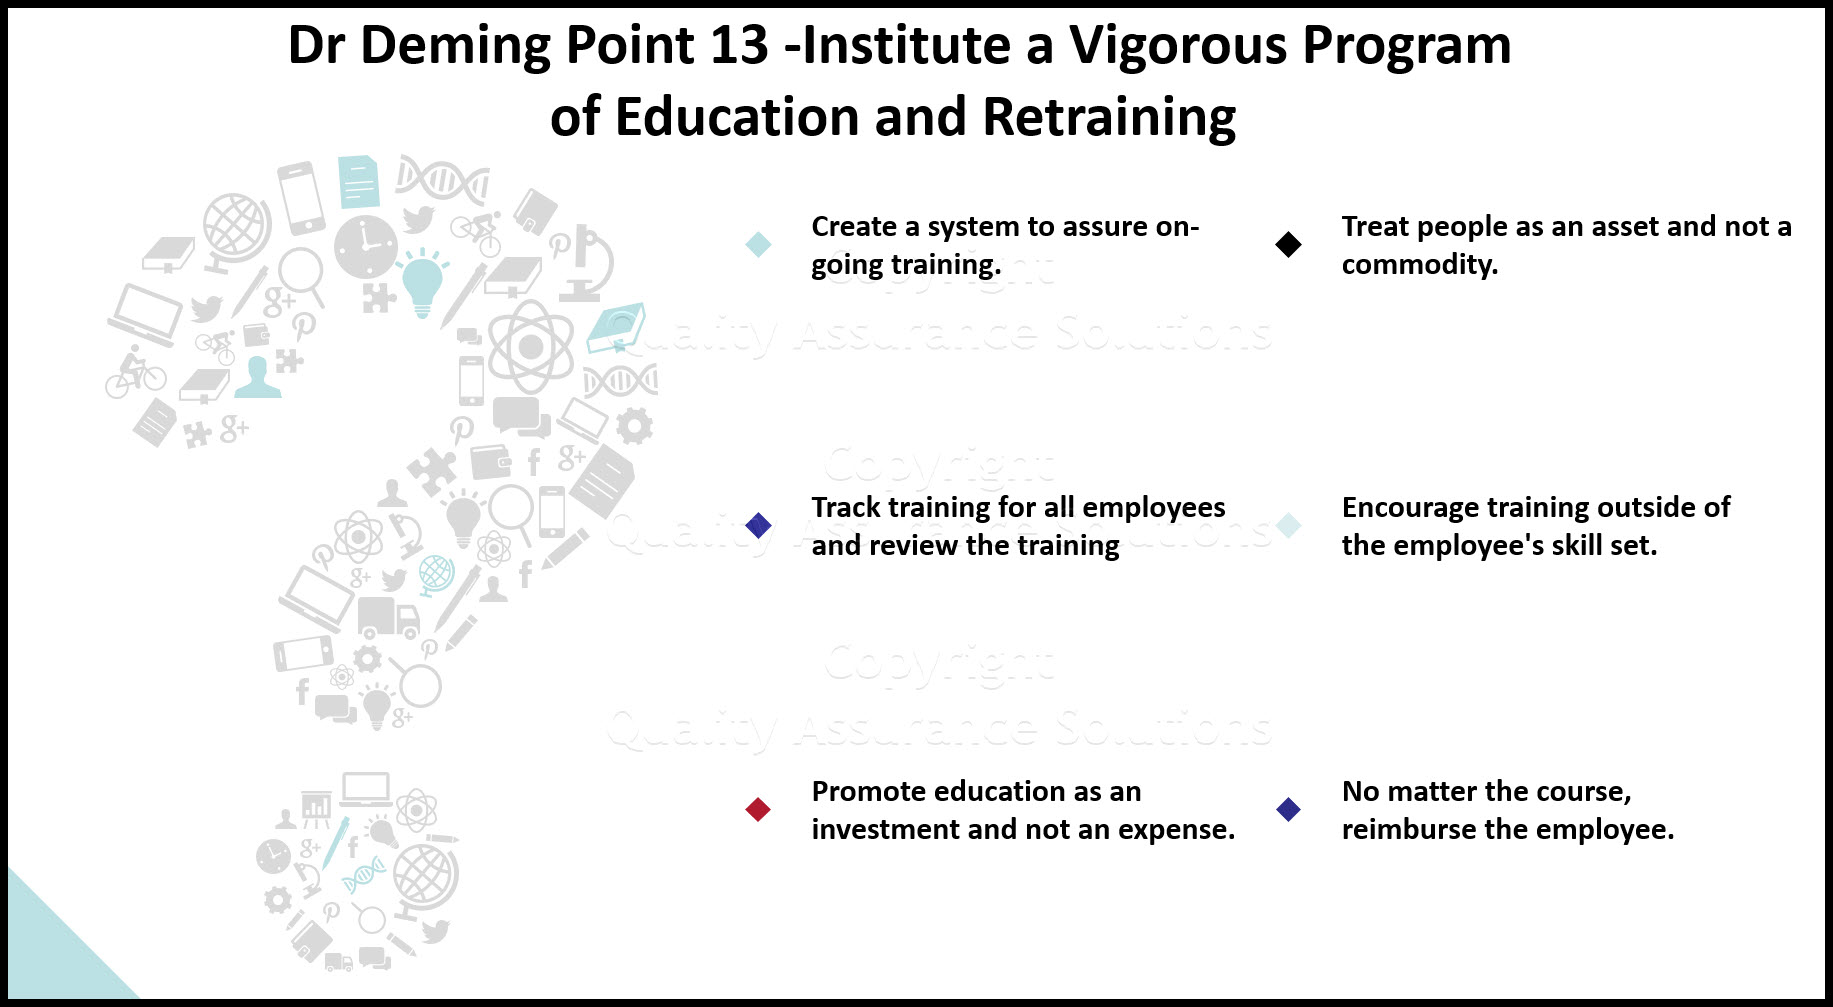 Learn Dr Deming Point 13 of Dr Deming 14 points, Institute a Vigorous Program of Education and Retraining.